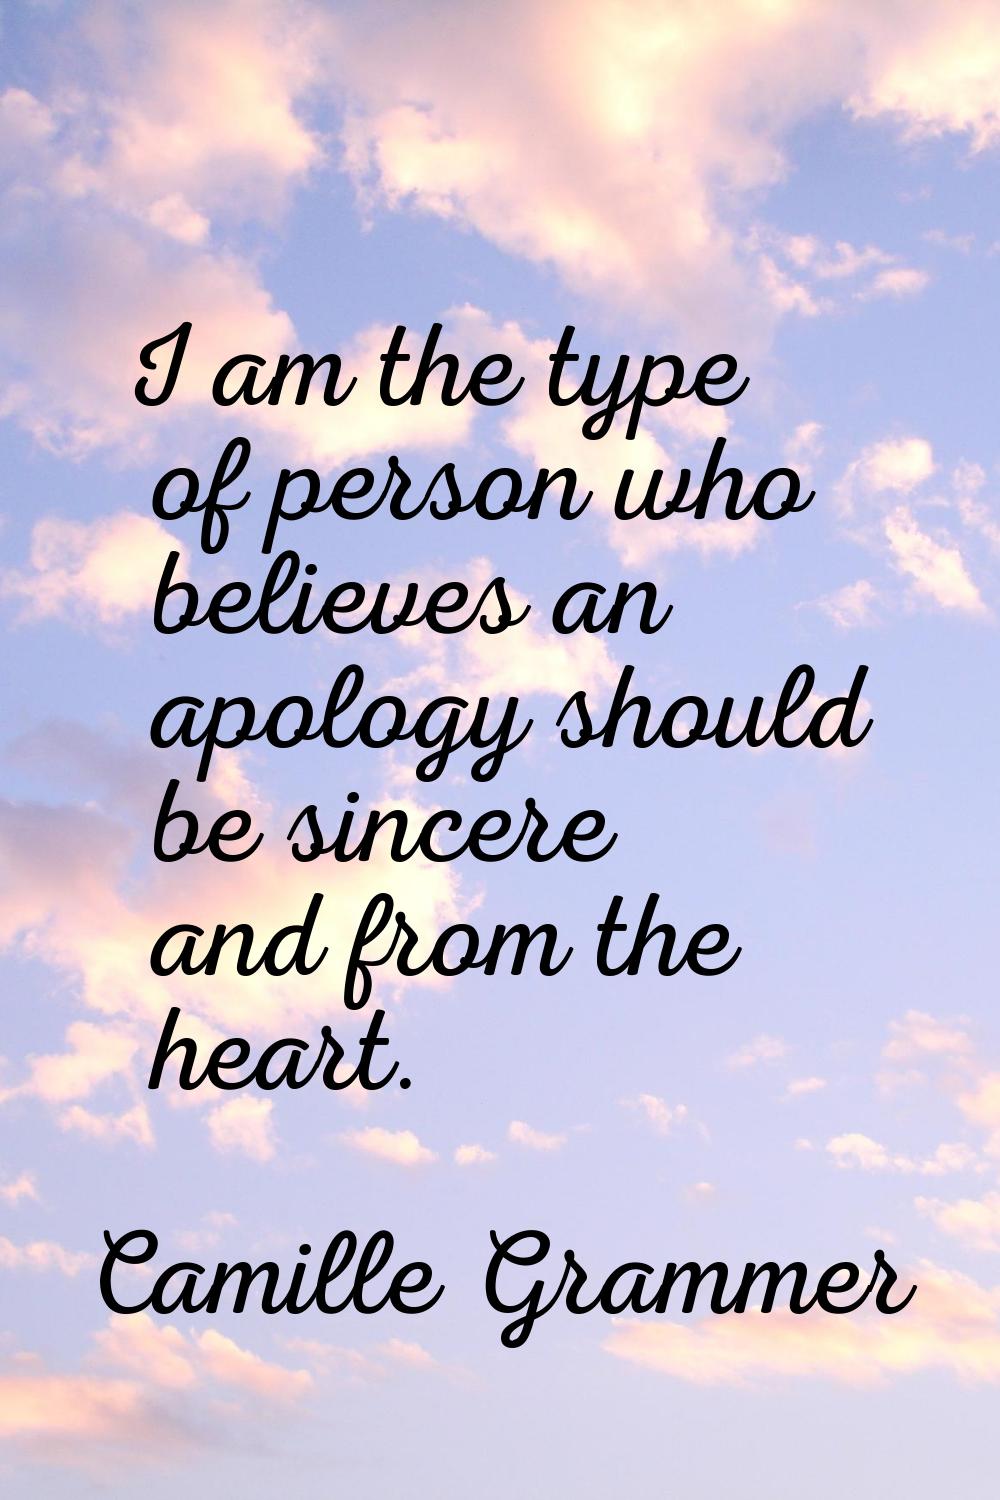 I am the type of person who believes an apology should be sincere and from the heart.